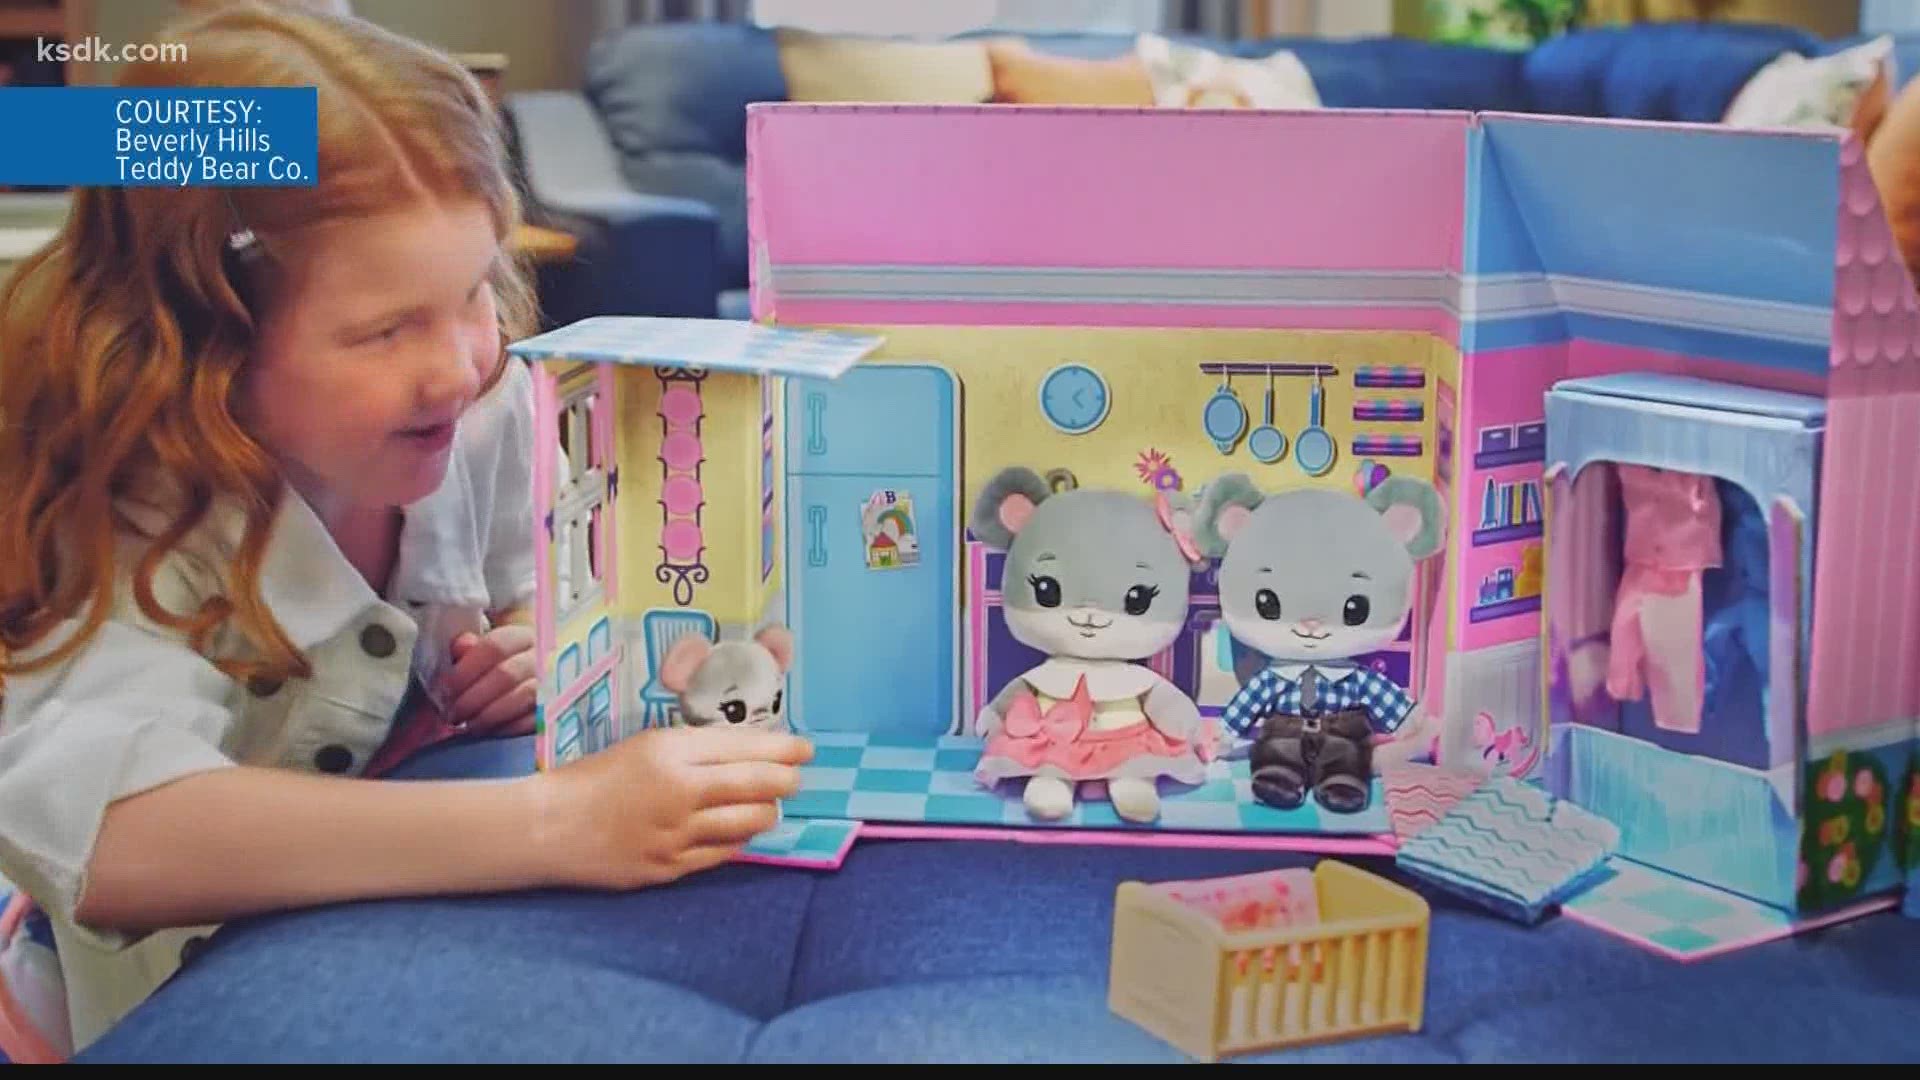 Toy Insider shares toys to keep kids busy so you can work from home easily.